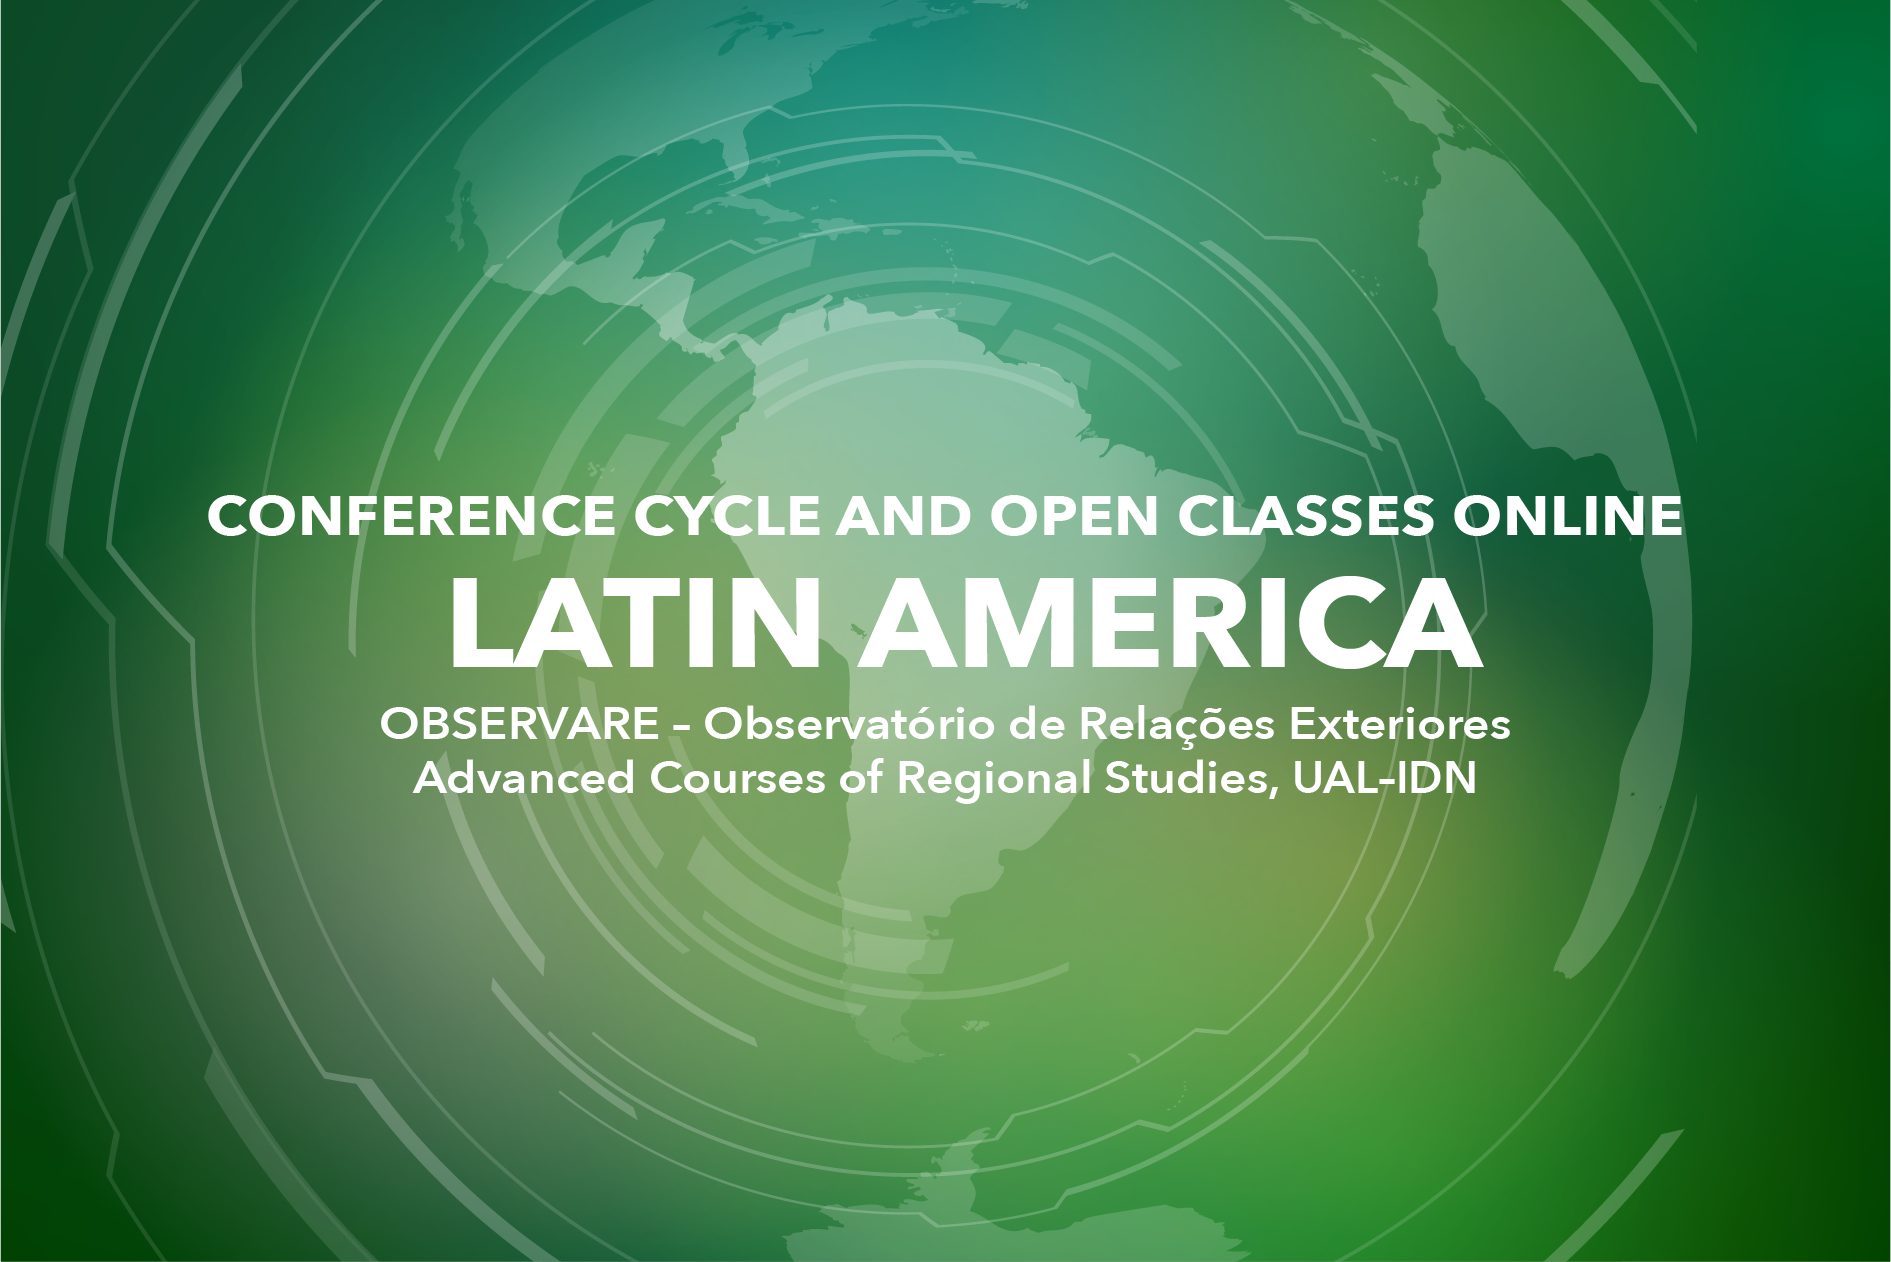 “LATIN AMERICA” – CONFERENCE CYCLE AND OPEN CLASSES 2022 | UAL-IDN